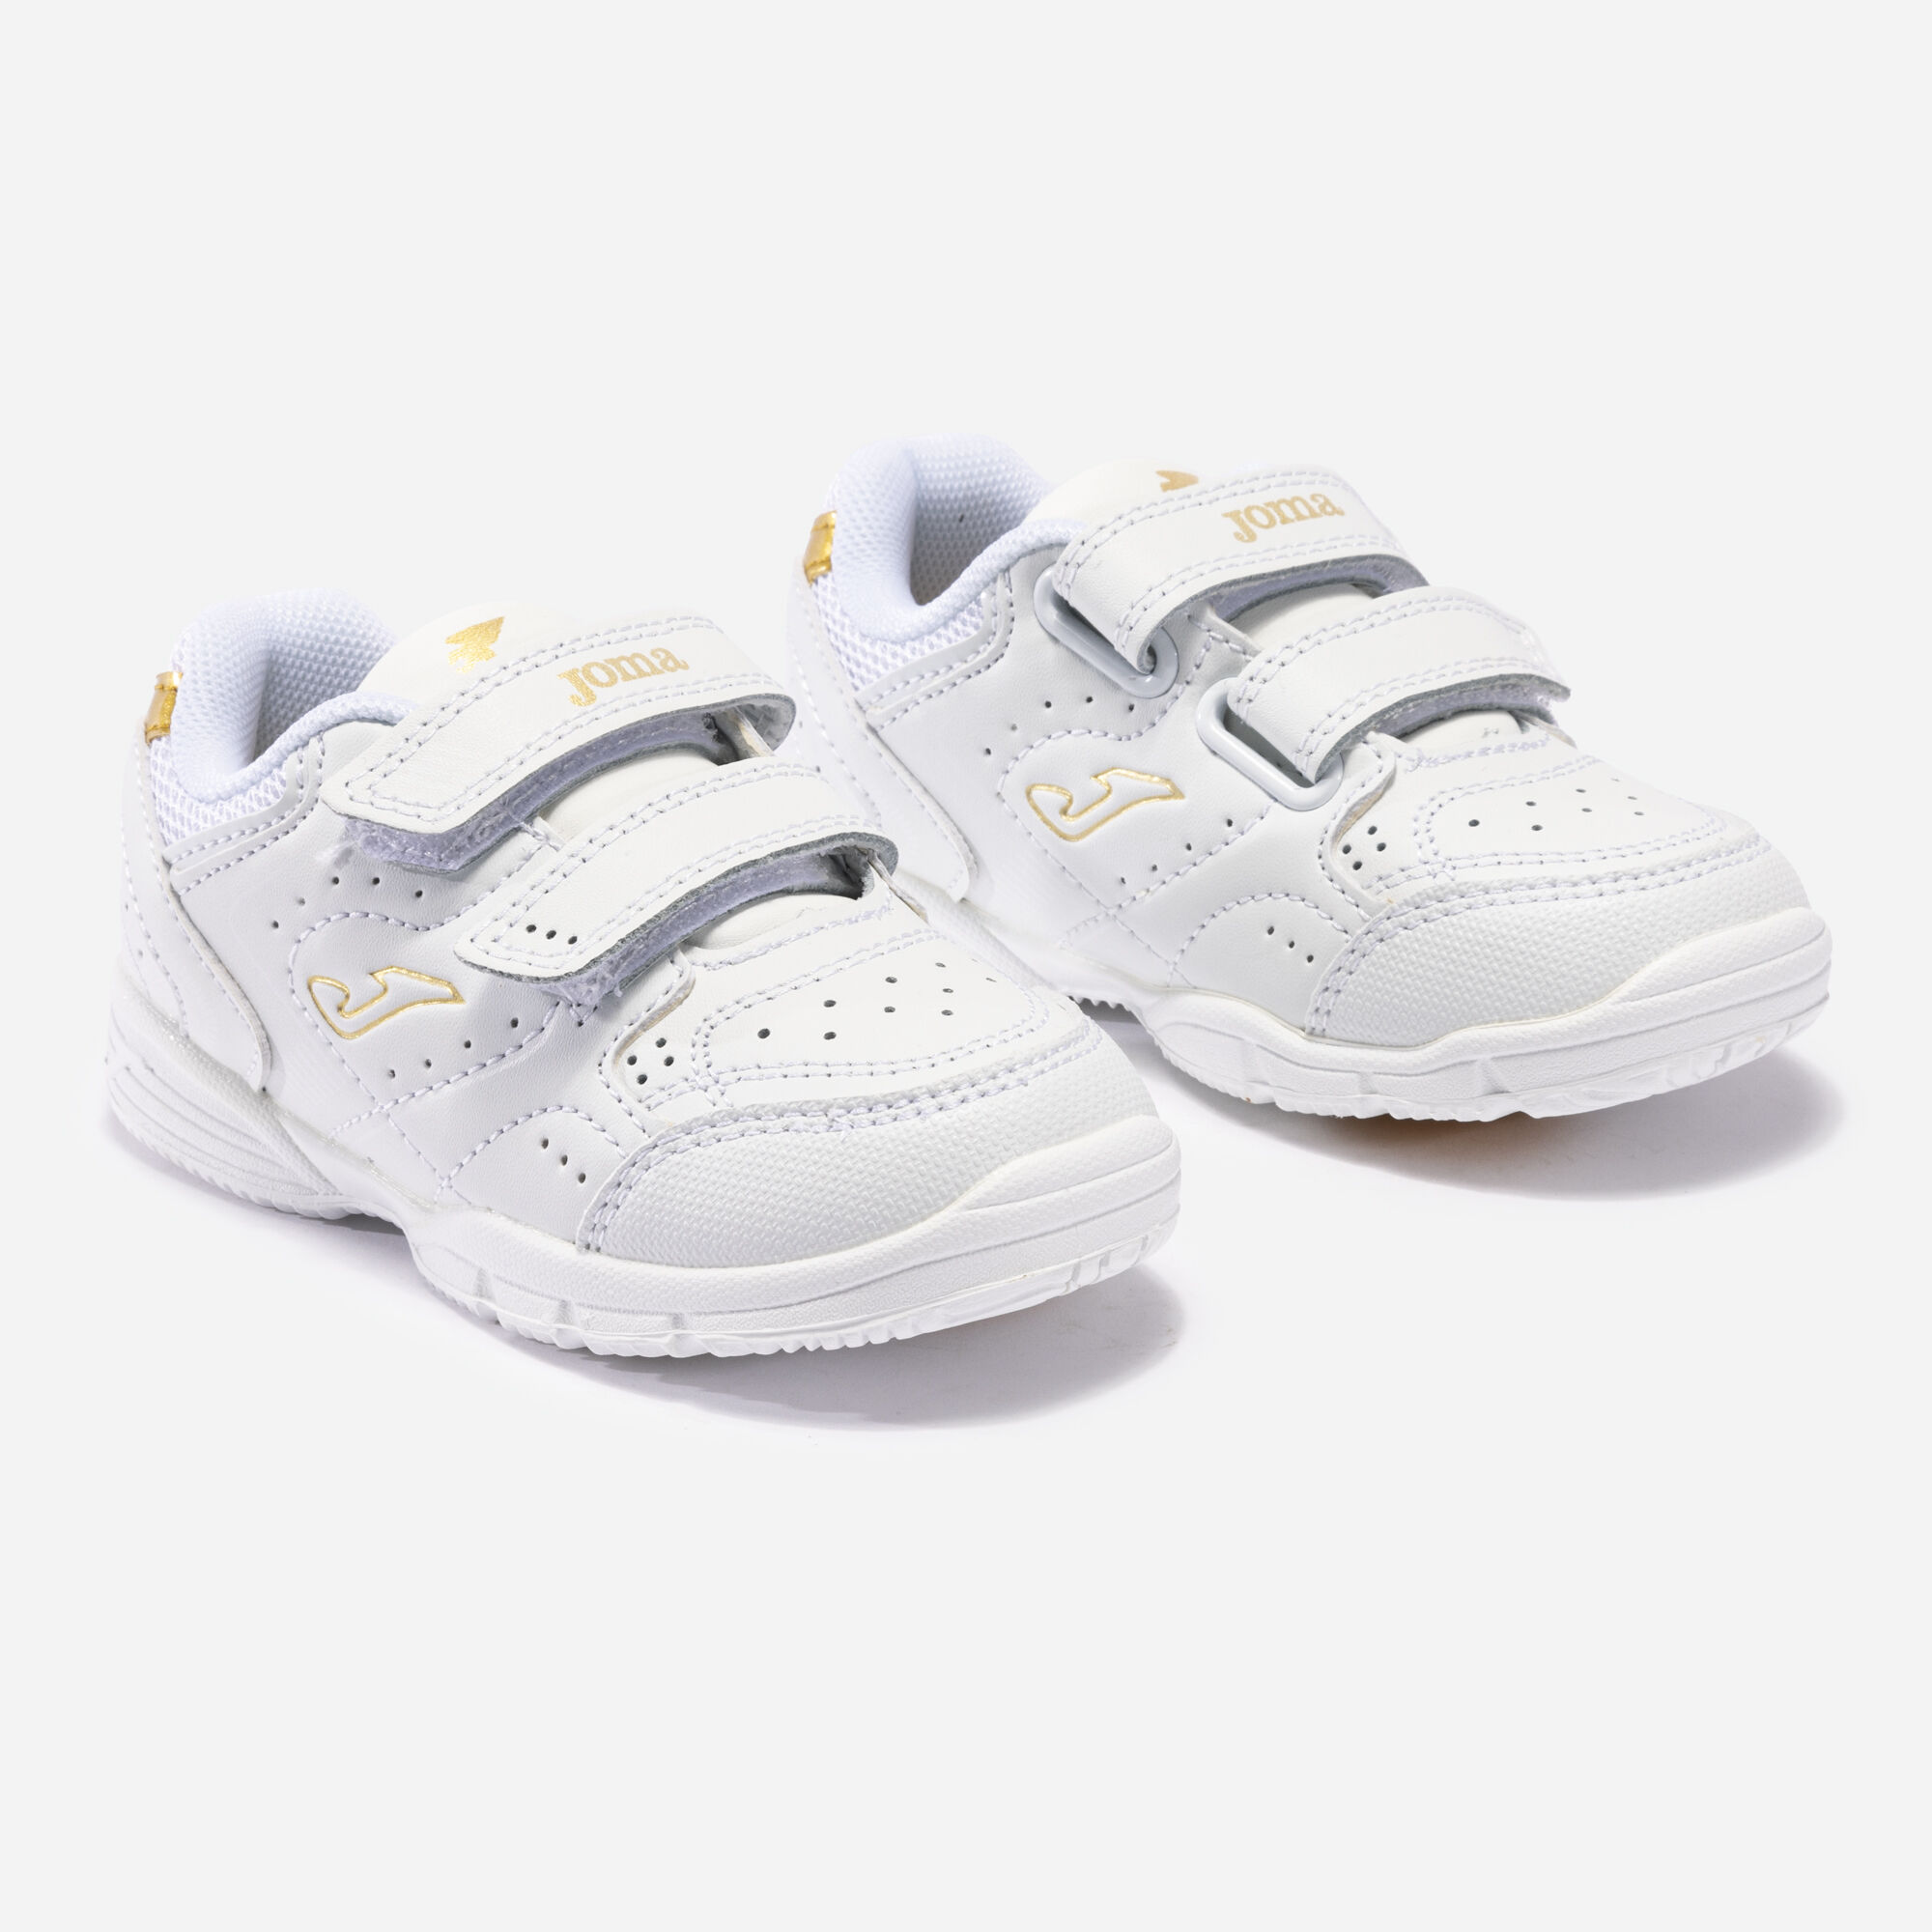 Chaussures casual School 22 junior blanc or